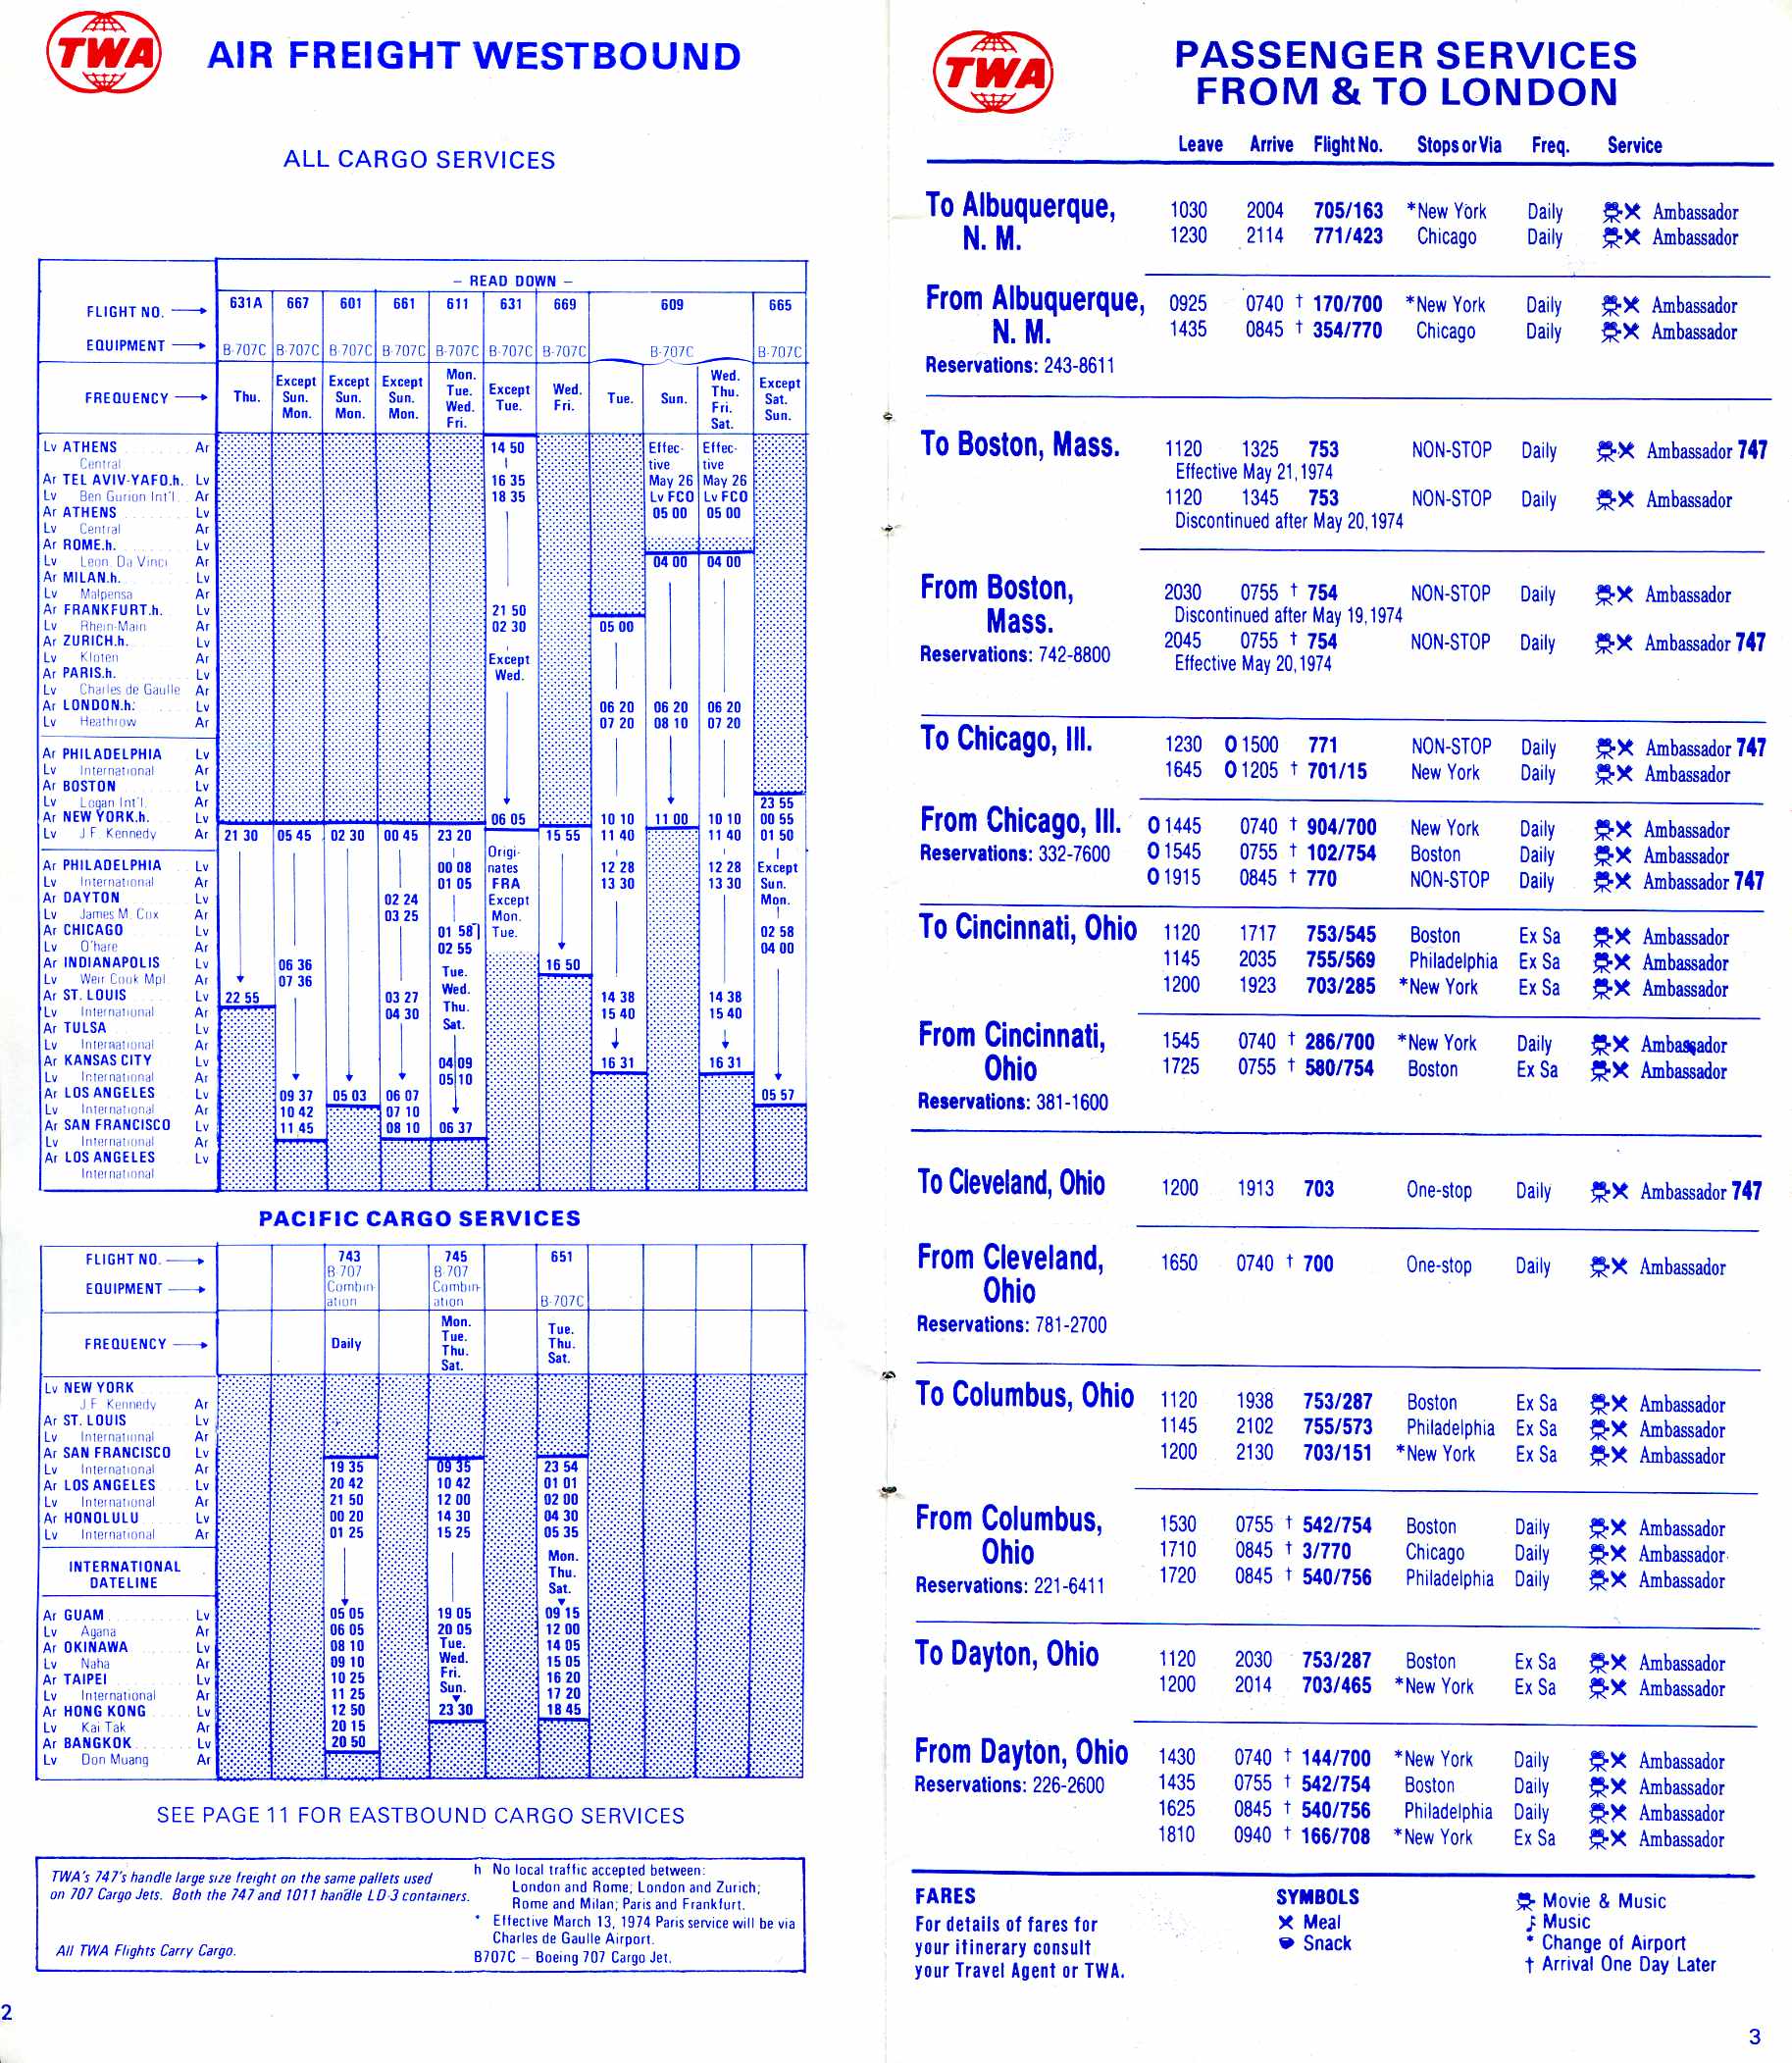 Trans World Airlines timetable 1974-05-01 2